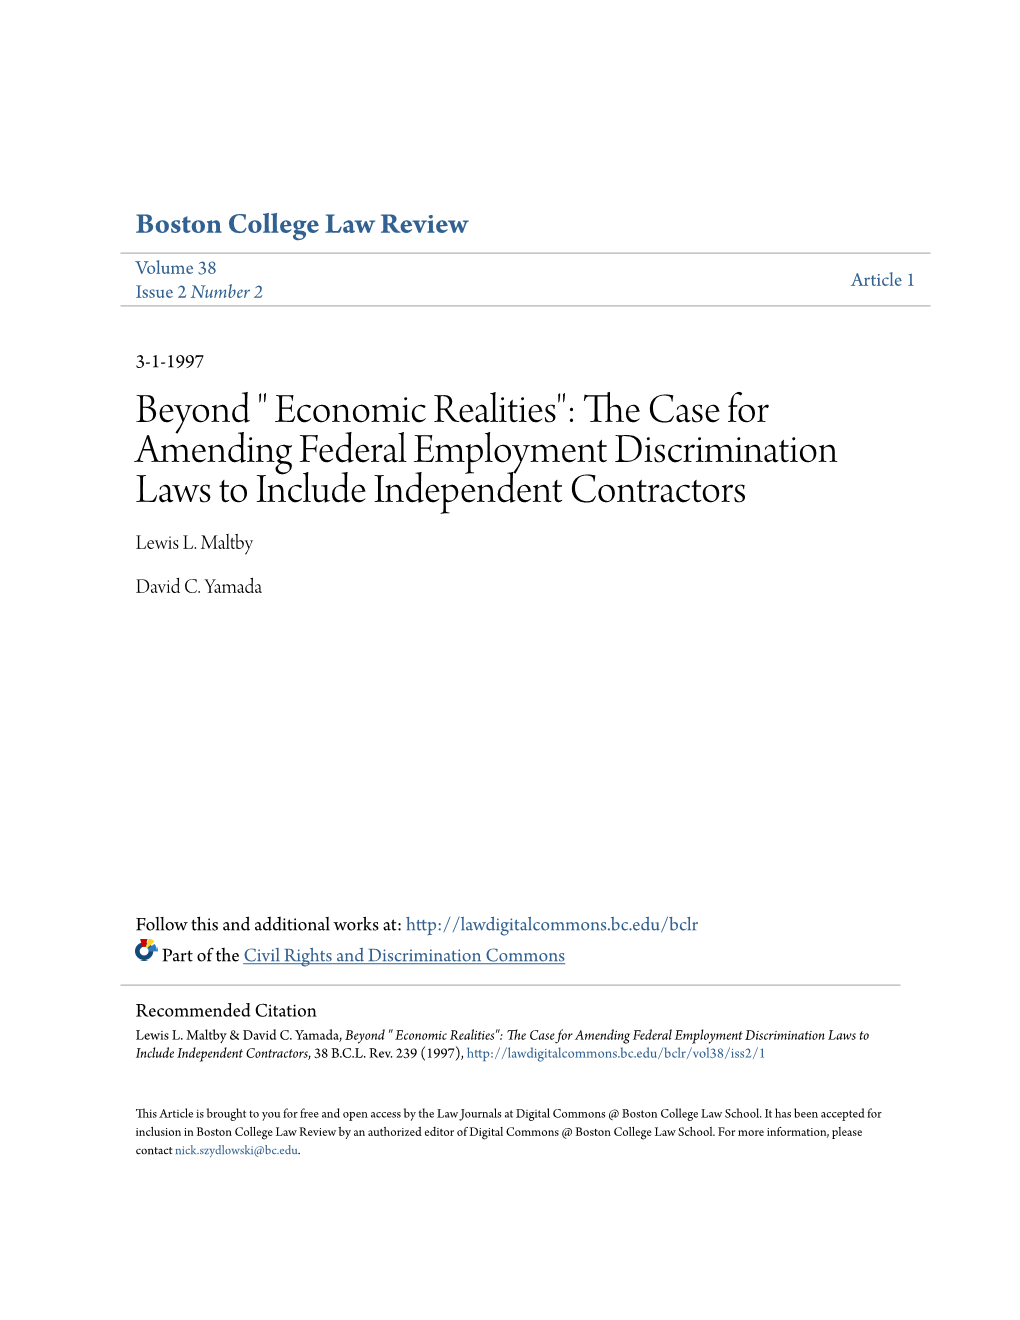 " Economic Realities": the Case for Amending Federal Employment Discrimination Laws to Include Independent Contractors, 38 B.C.L